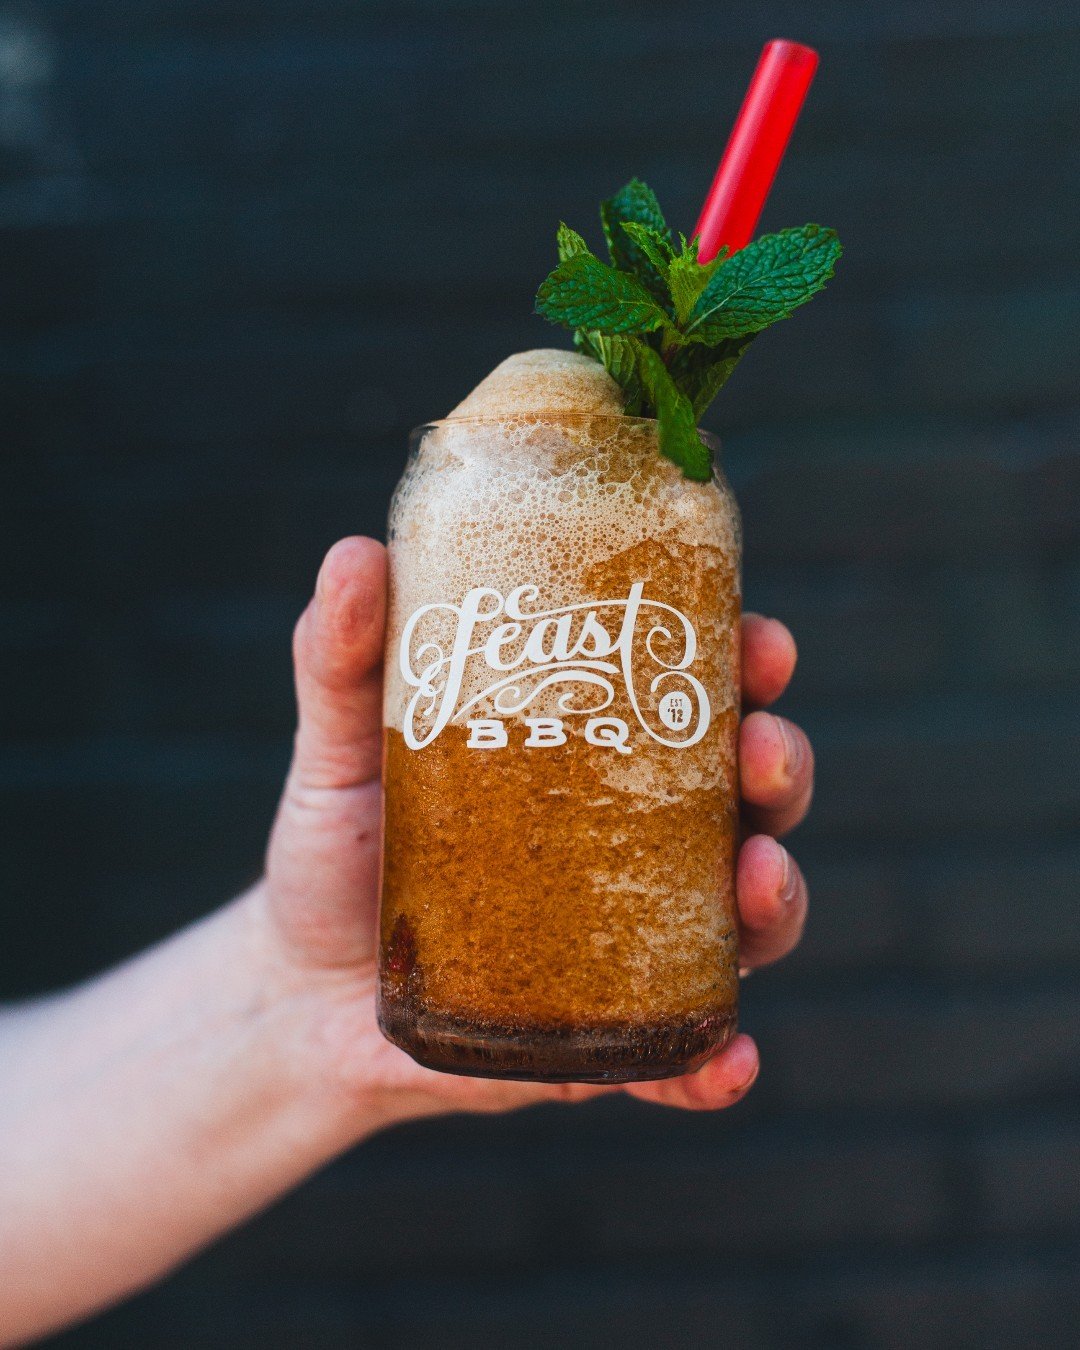 Derby Season is upon us. Celebrate with a Mint Julep slushy!

Brown Sugar and mint are the key flavors in this very limited beverage. Make yours festive with a shot of Old Forester bourbon.